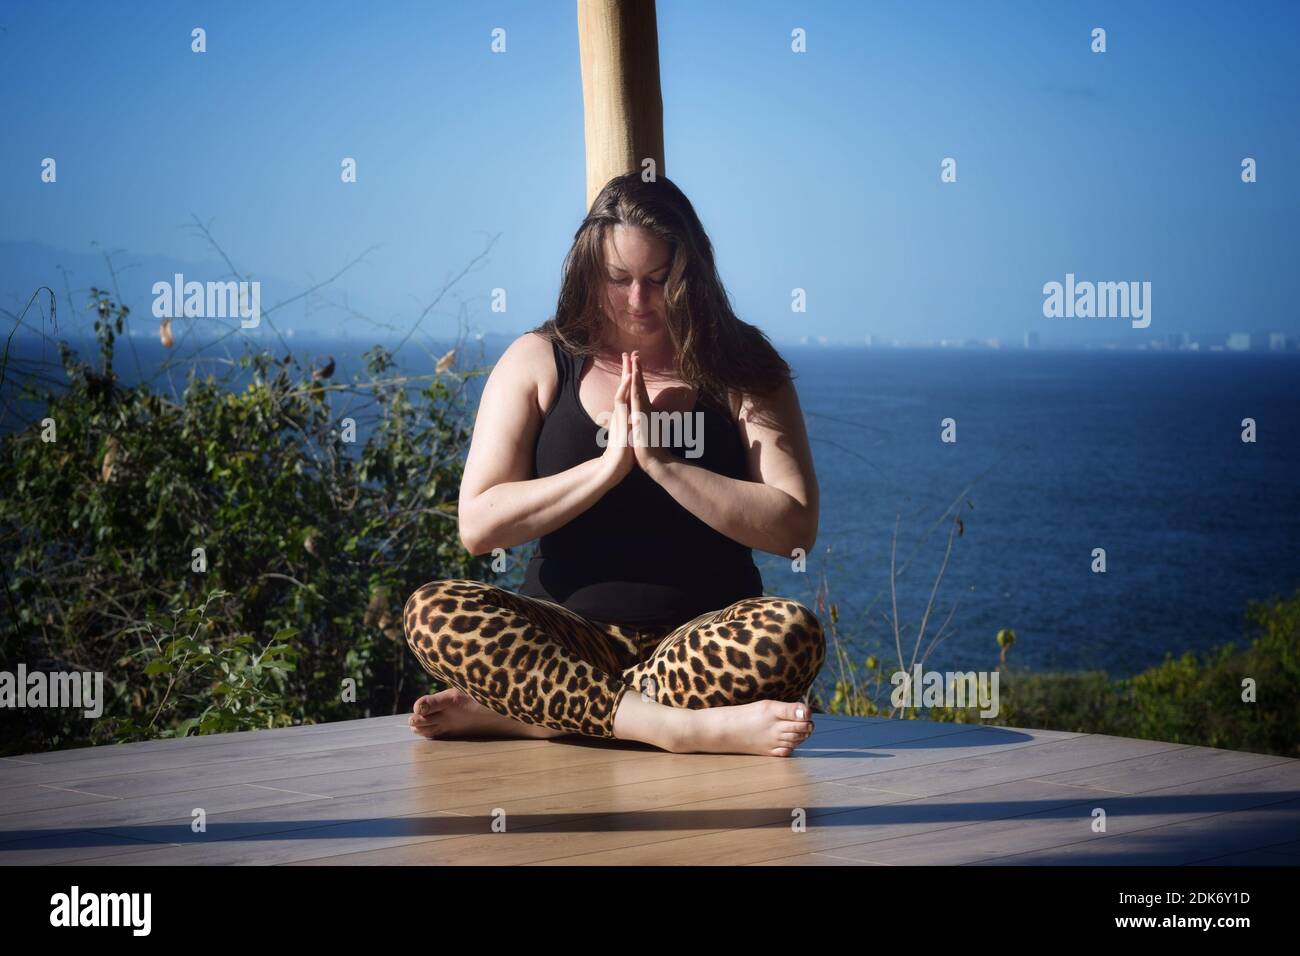 Woman Meditating While Sitting On Wooden Floor Against Sea And Sky Stock Photo